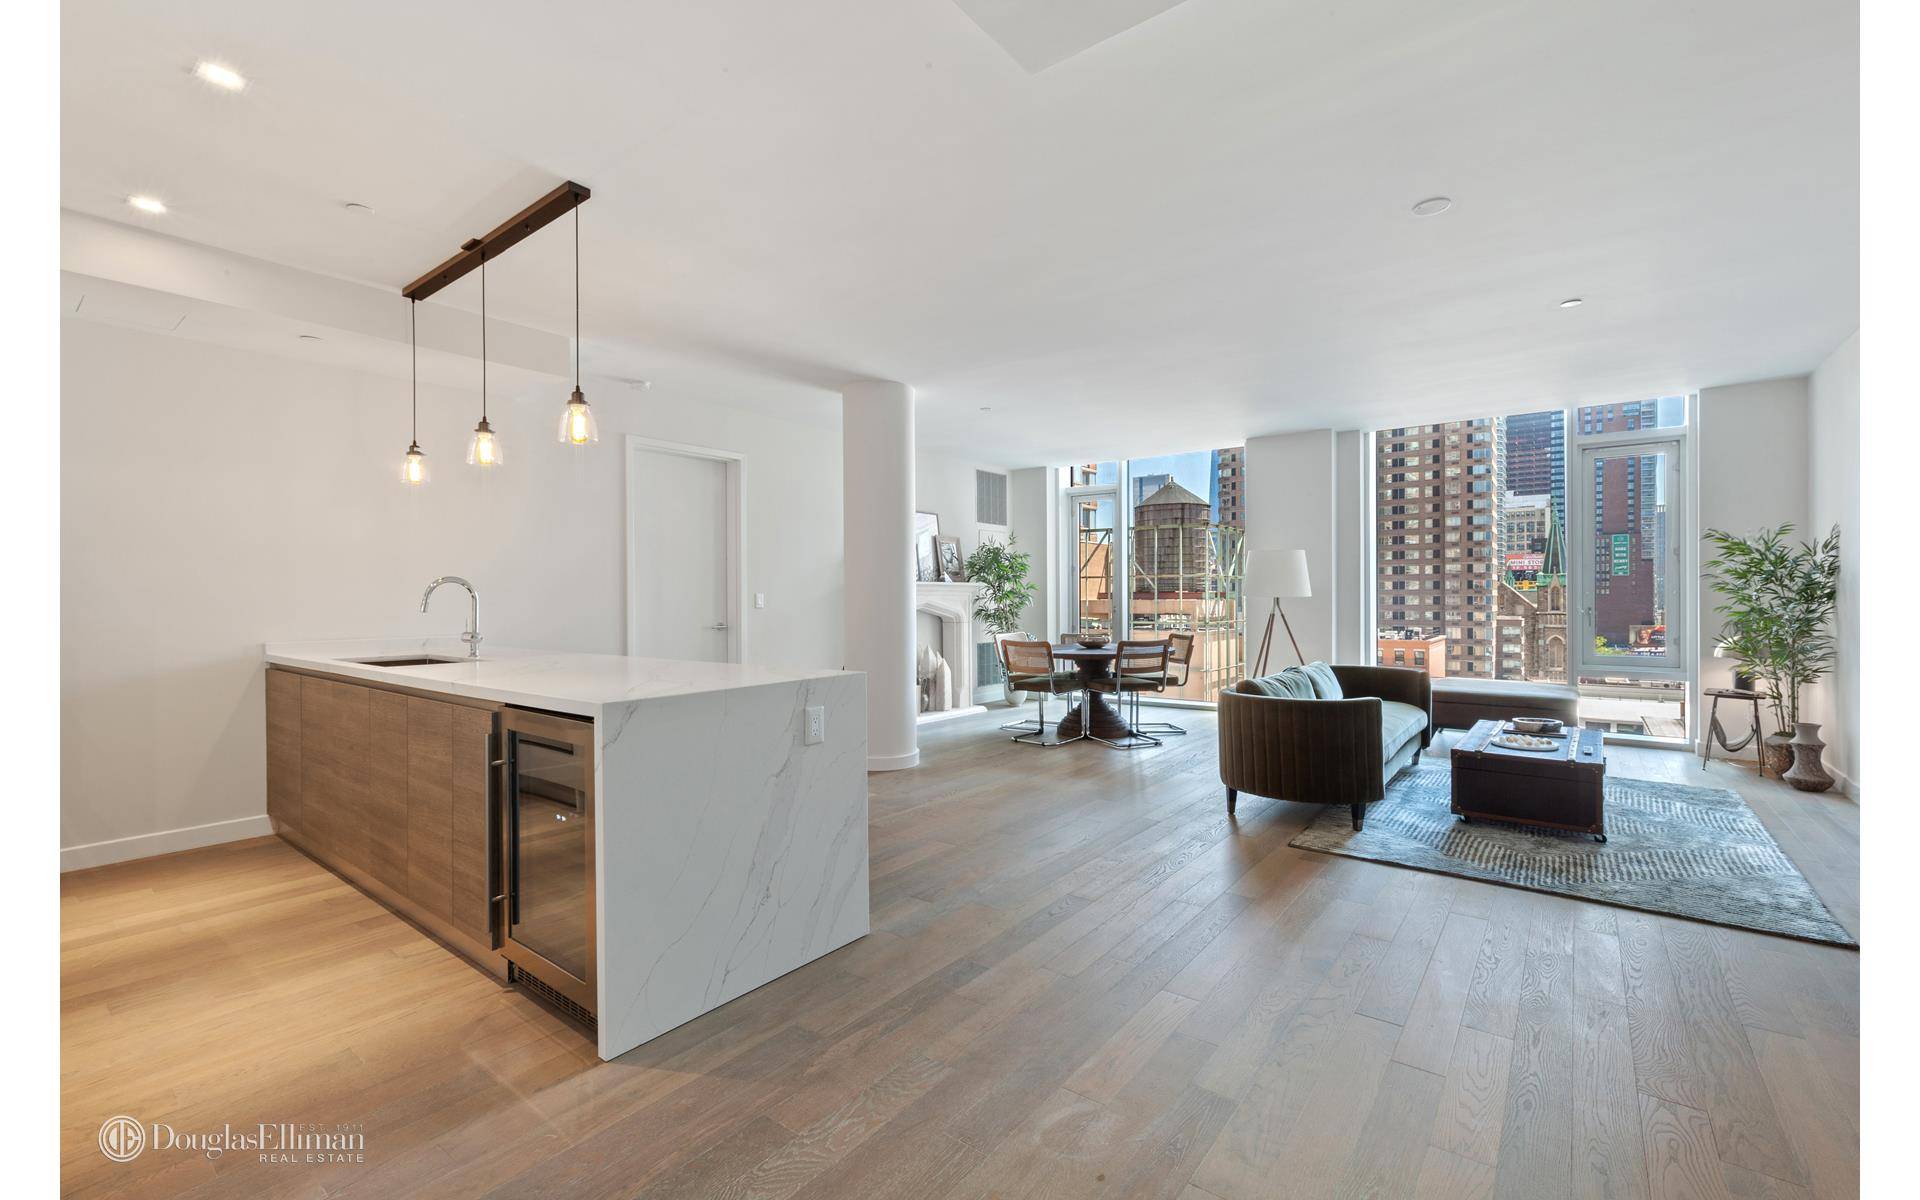 Immediate Occupancy ! The exclusive Charlie West is a 16 story new development condominium that provides residents with an elevated, boutique lifestyle across 2 separate towers with only 5 units ...